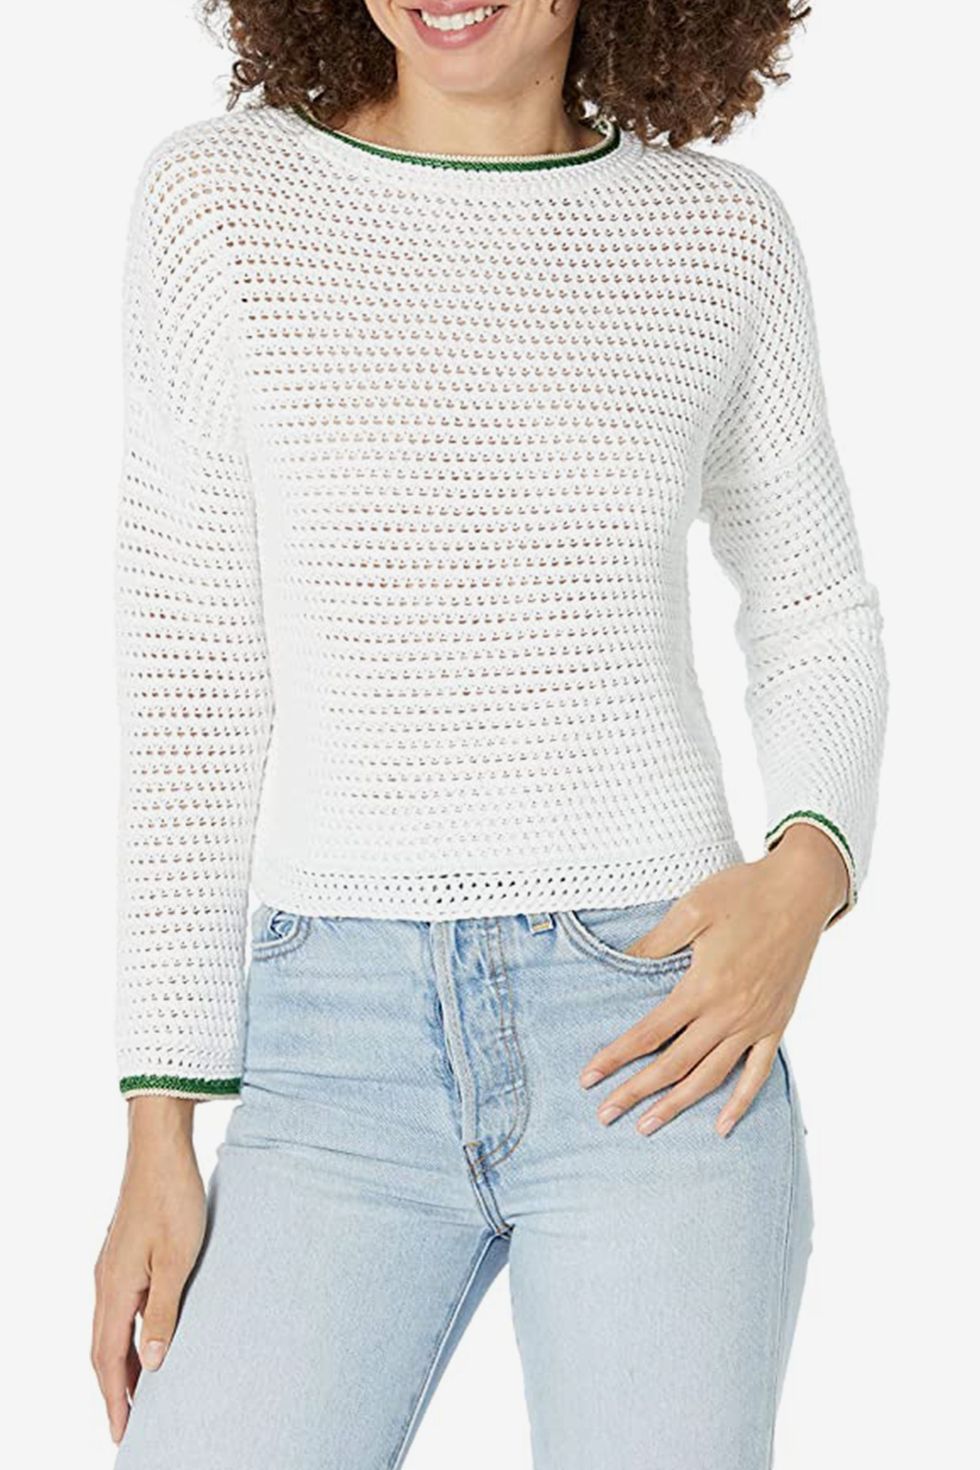 Crochet Contrast Tipping Crew Sweater 